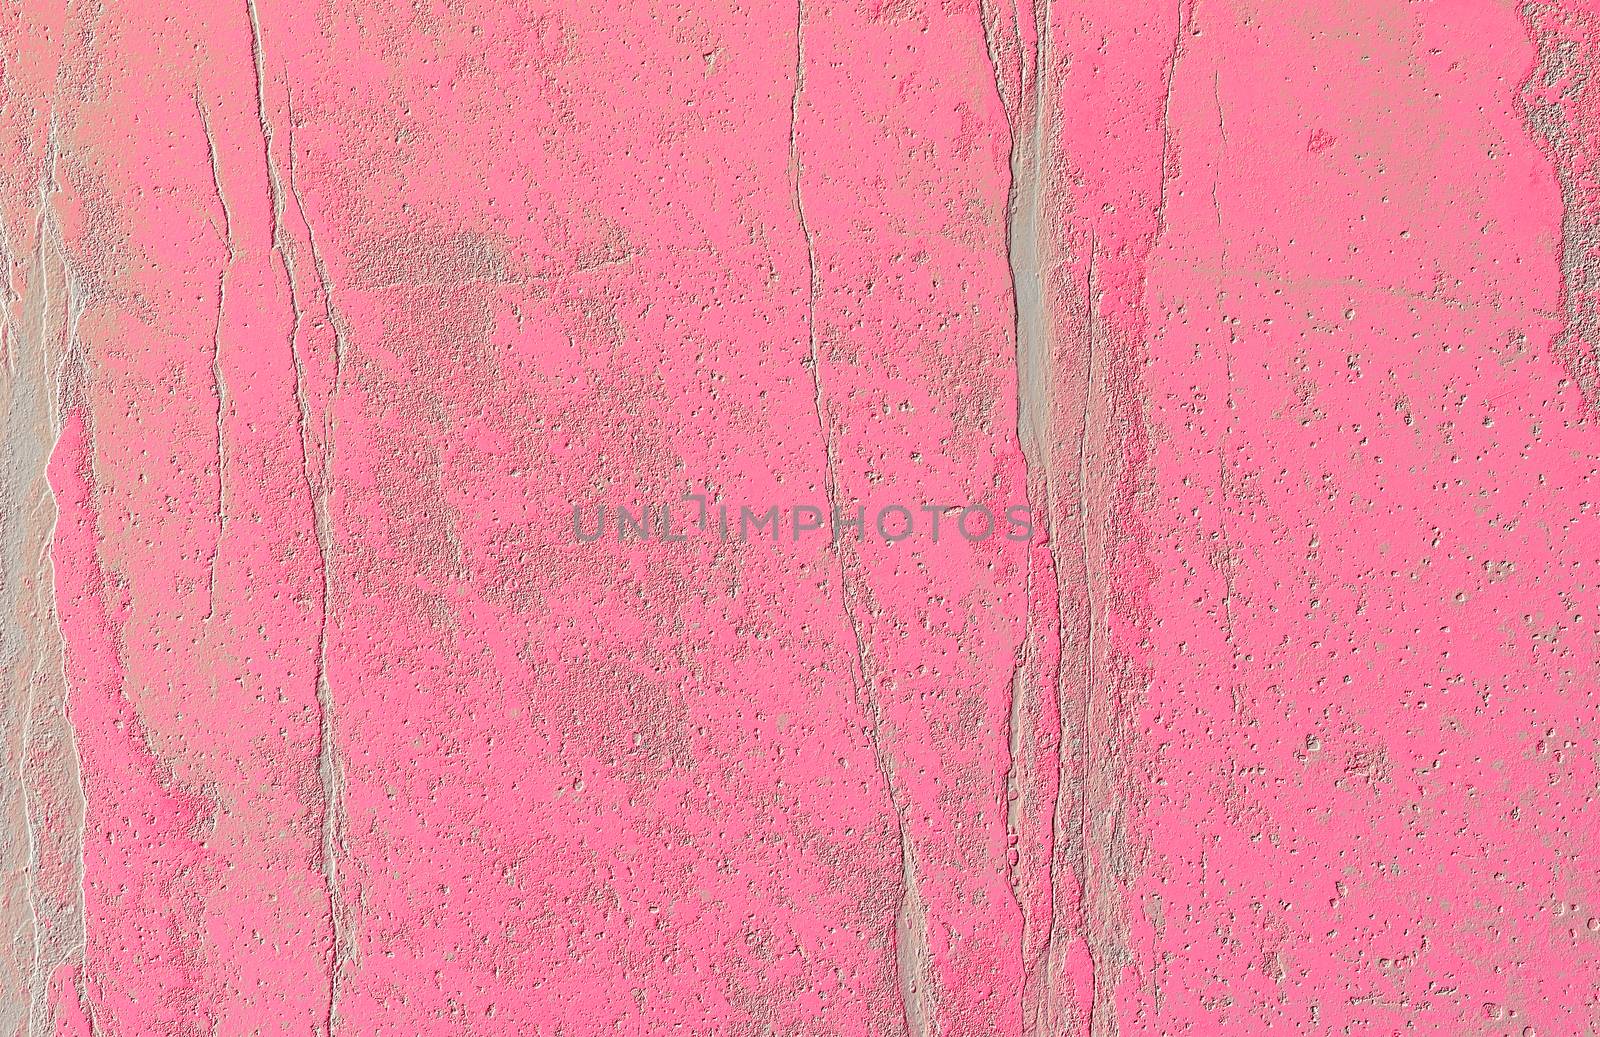 Grungy stone texture background. Abstract pink background.